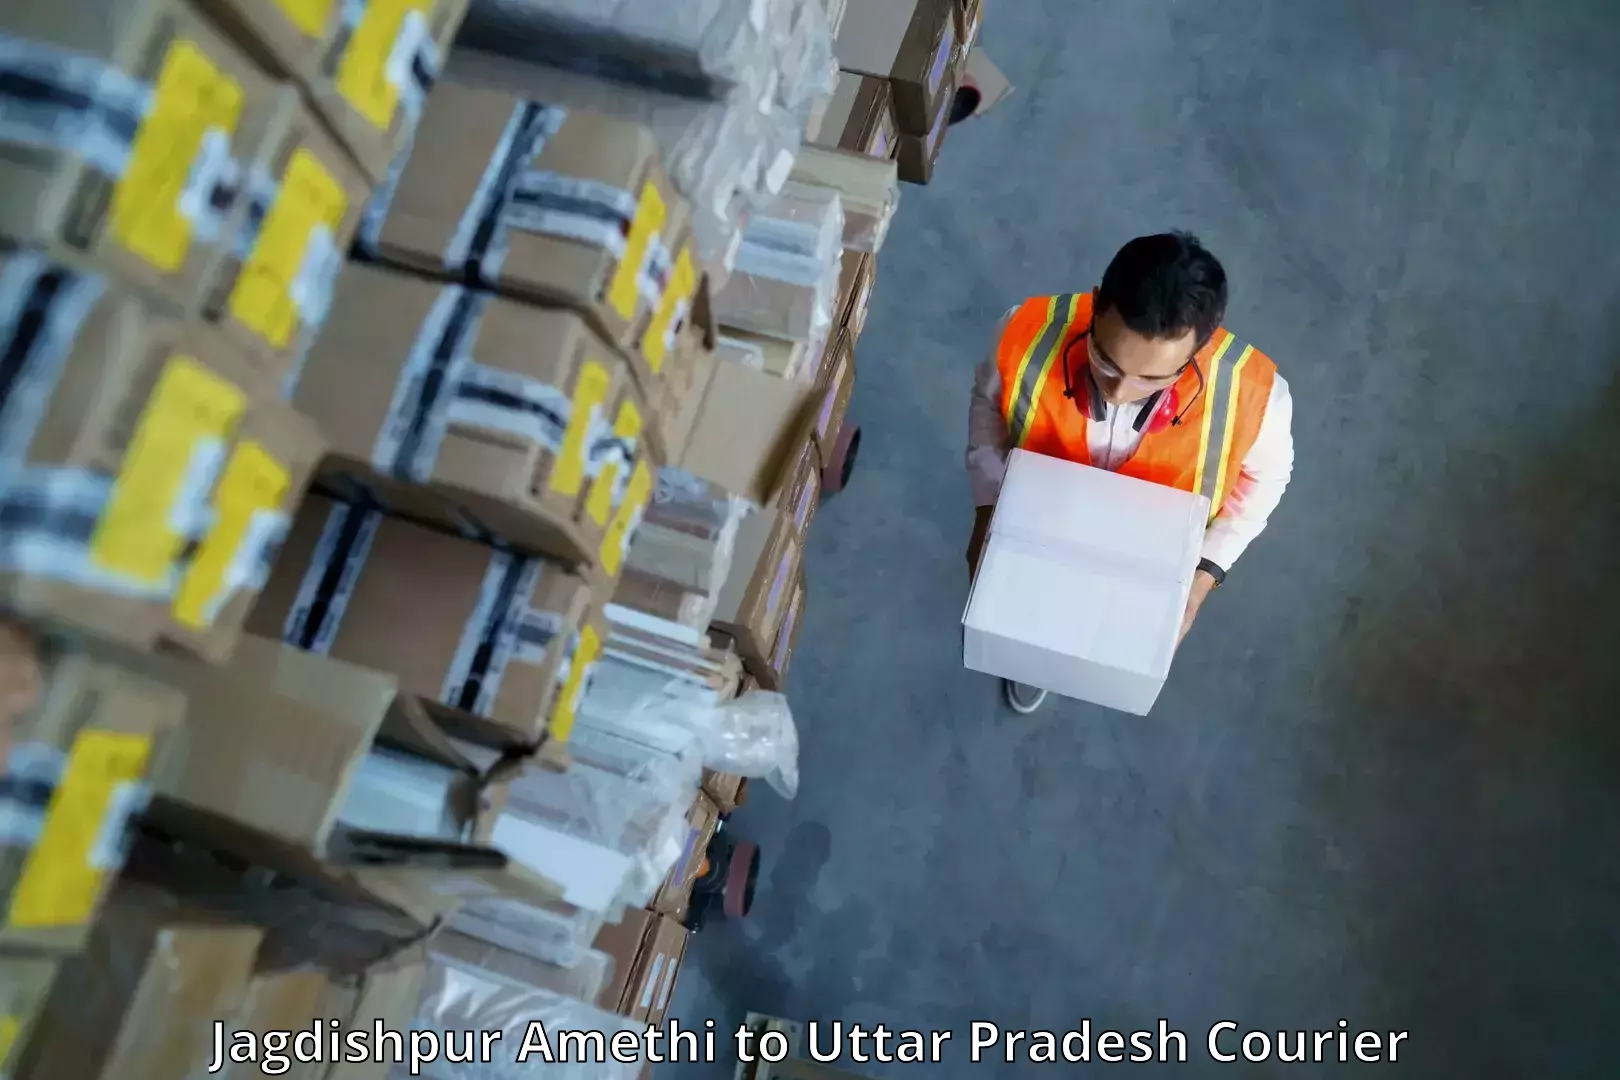 Round-the-clock parcel delivery Jagdishpur Amethi to Bareilly